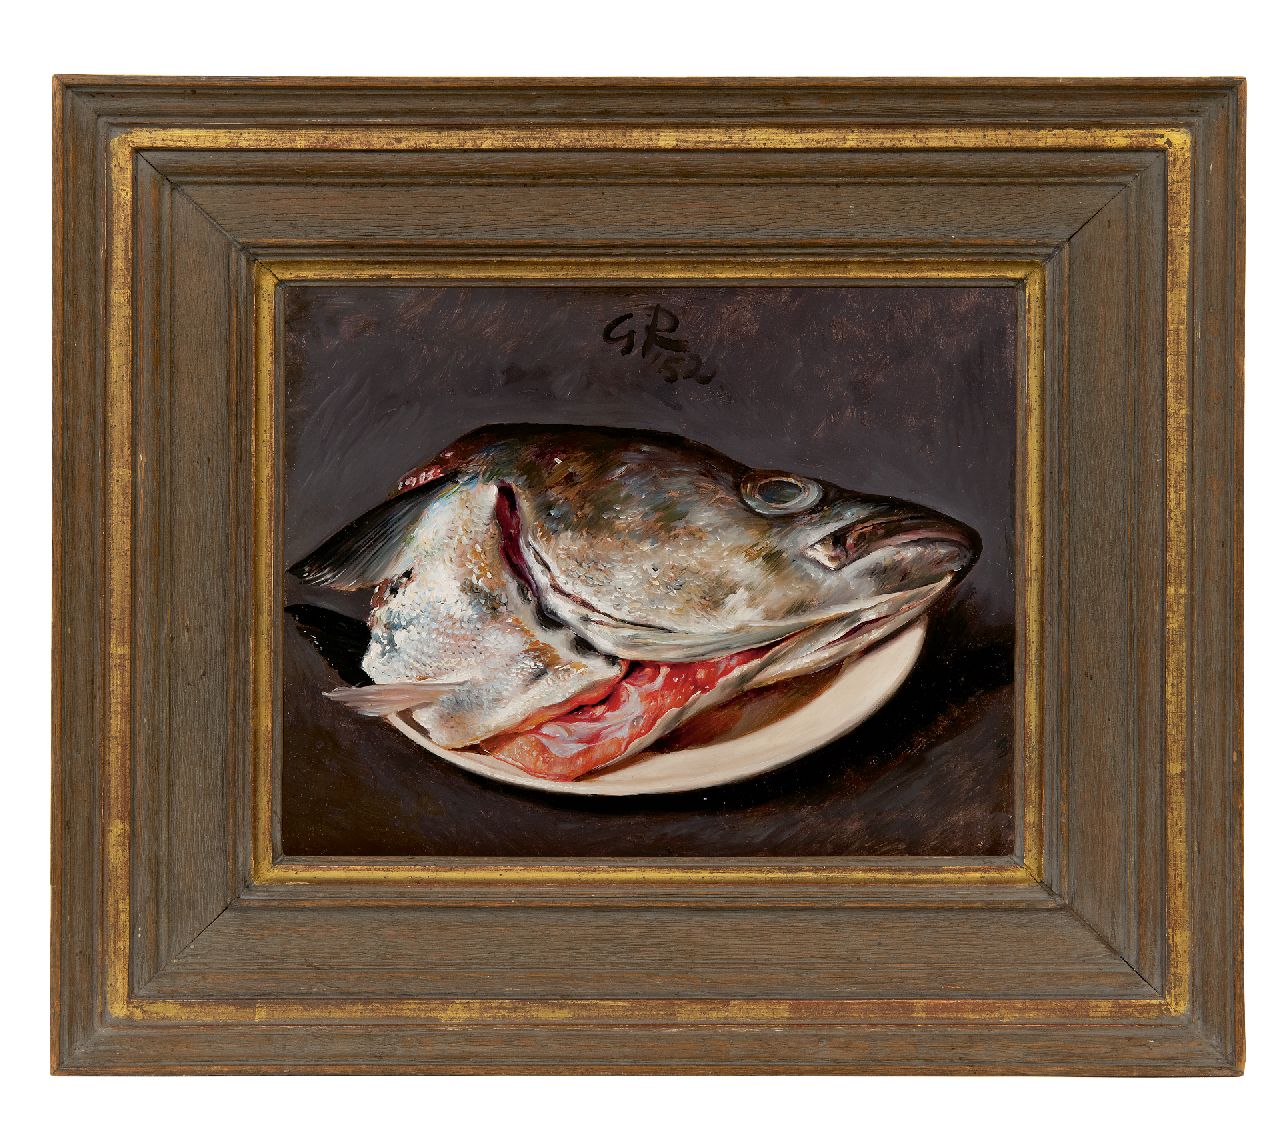 Röling G.V.A.  | Gerard Victor Alphons Röling | Paintings offered for sale | A salmon head on a plate, oil on board 25.1 x 30.3 cm, signed upper centre with initials and in full reverse and dated '52 and 1952 on the reverse